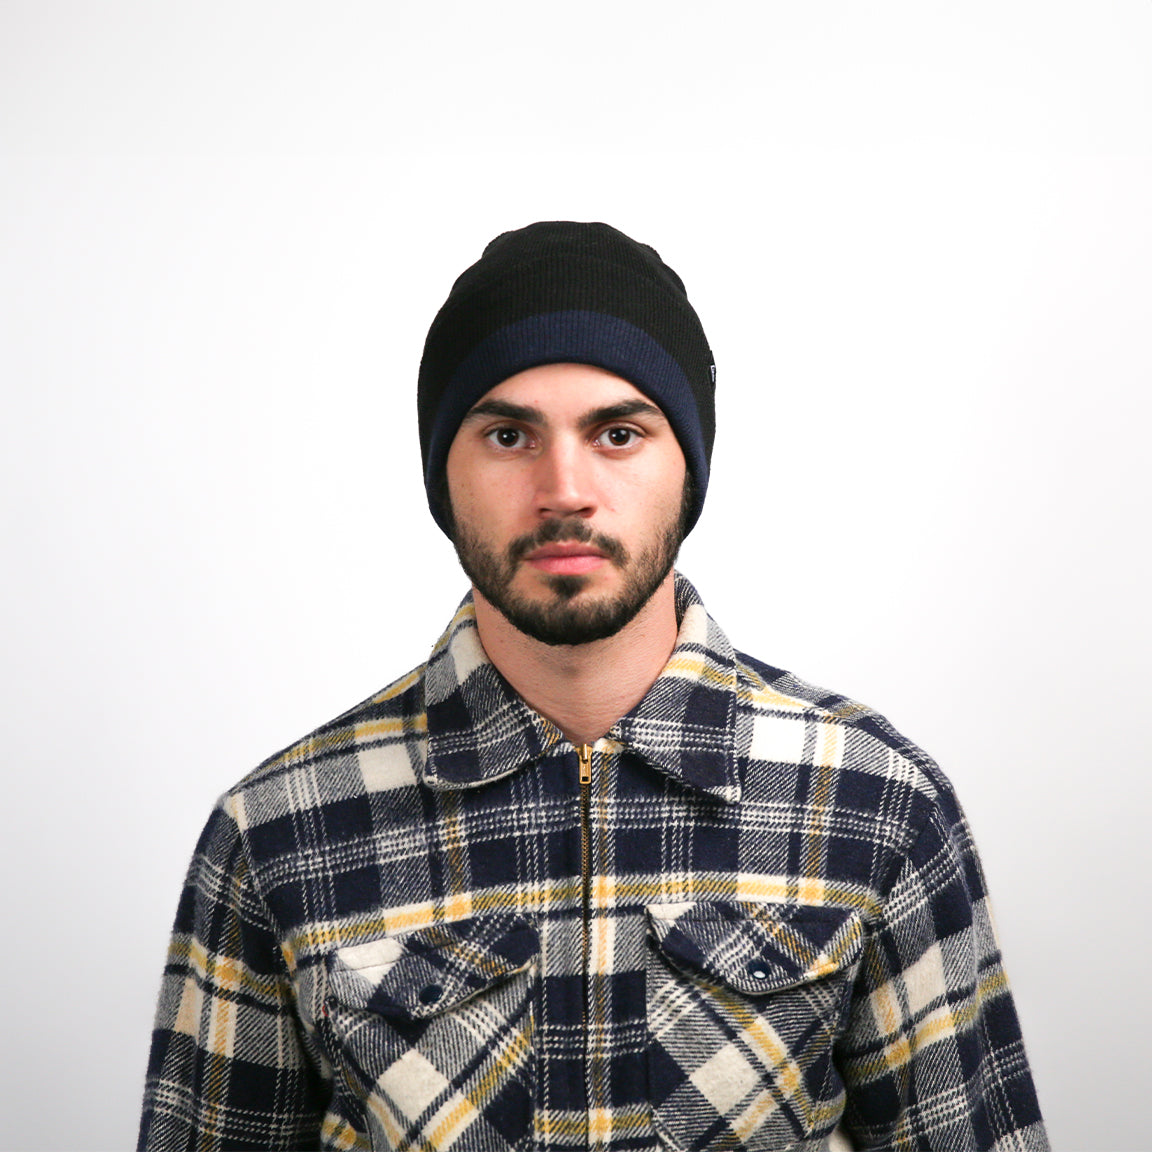 The man is directly facing the viewer with a neutral expression. His beanie is black with a navy blue band around the edge. The soft, thick texture of his plaid flannel shirt, featuring navy blue, white, and mustard yellow squares, is visible. The fabric has a slight sheen, indicating its thickness and warmth.